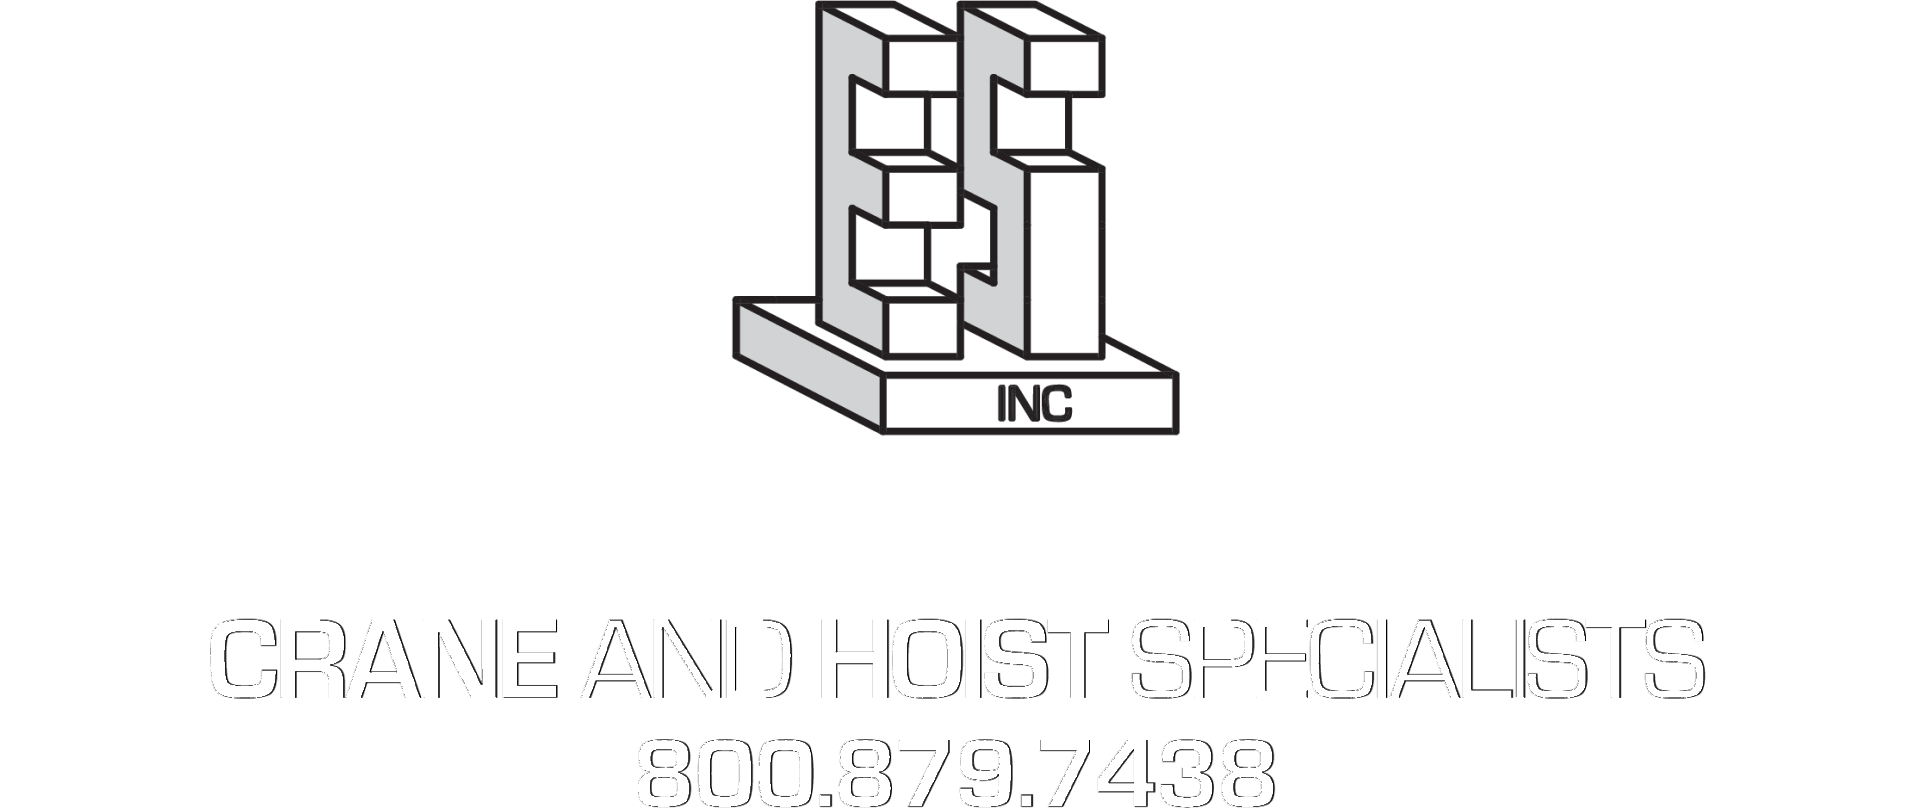 Engineered Systems Crane And Host Specialists